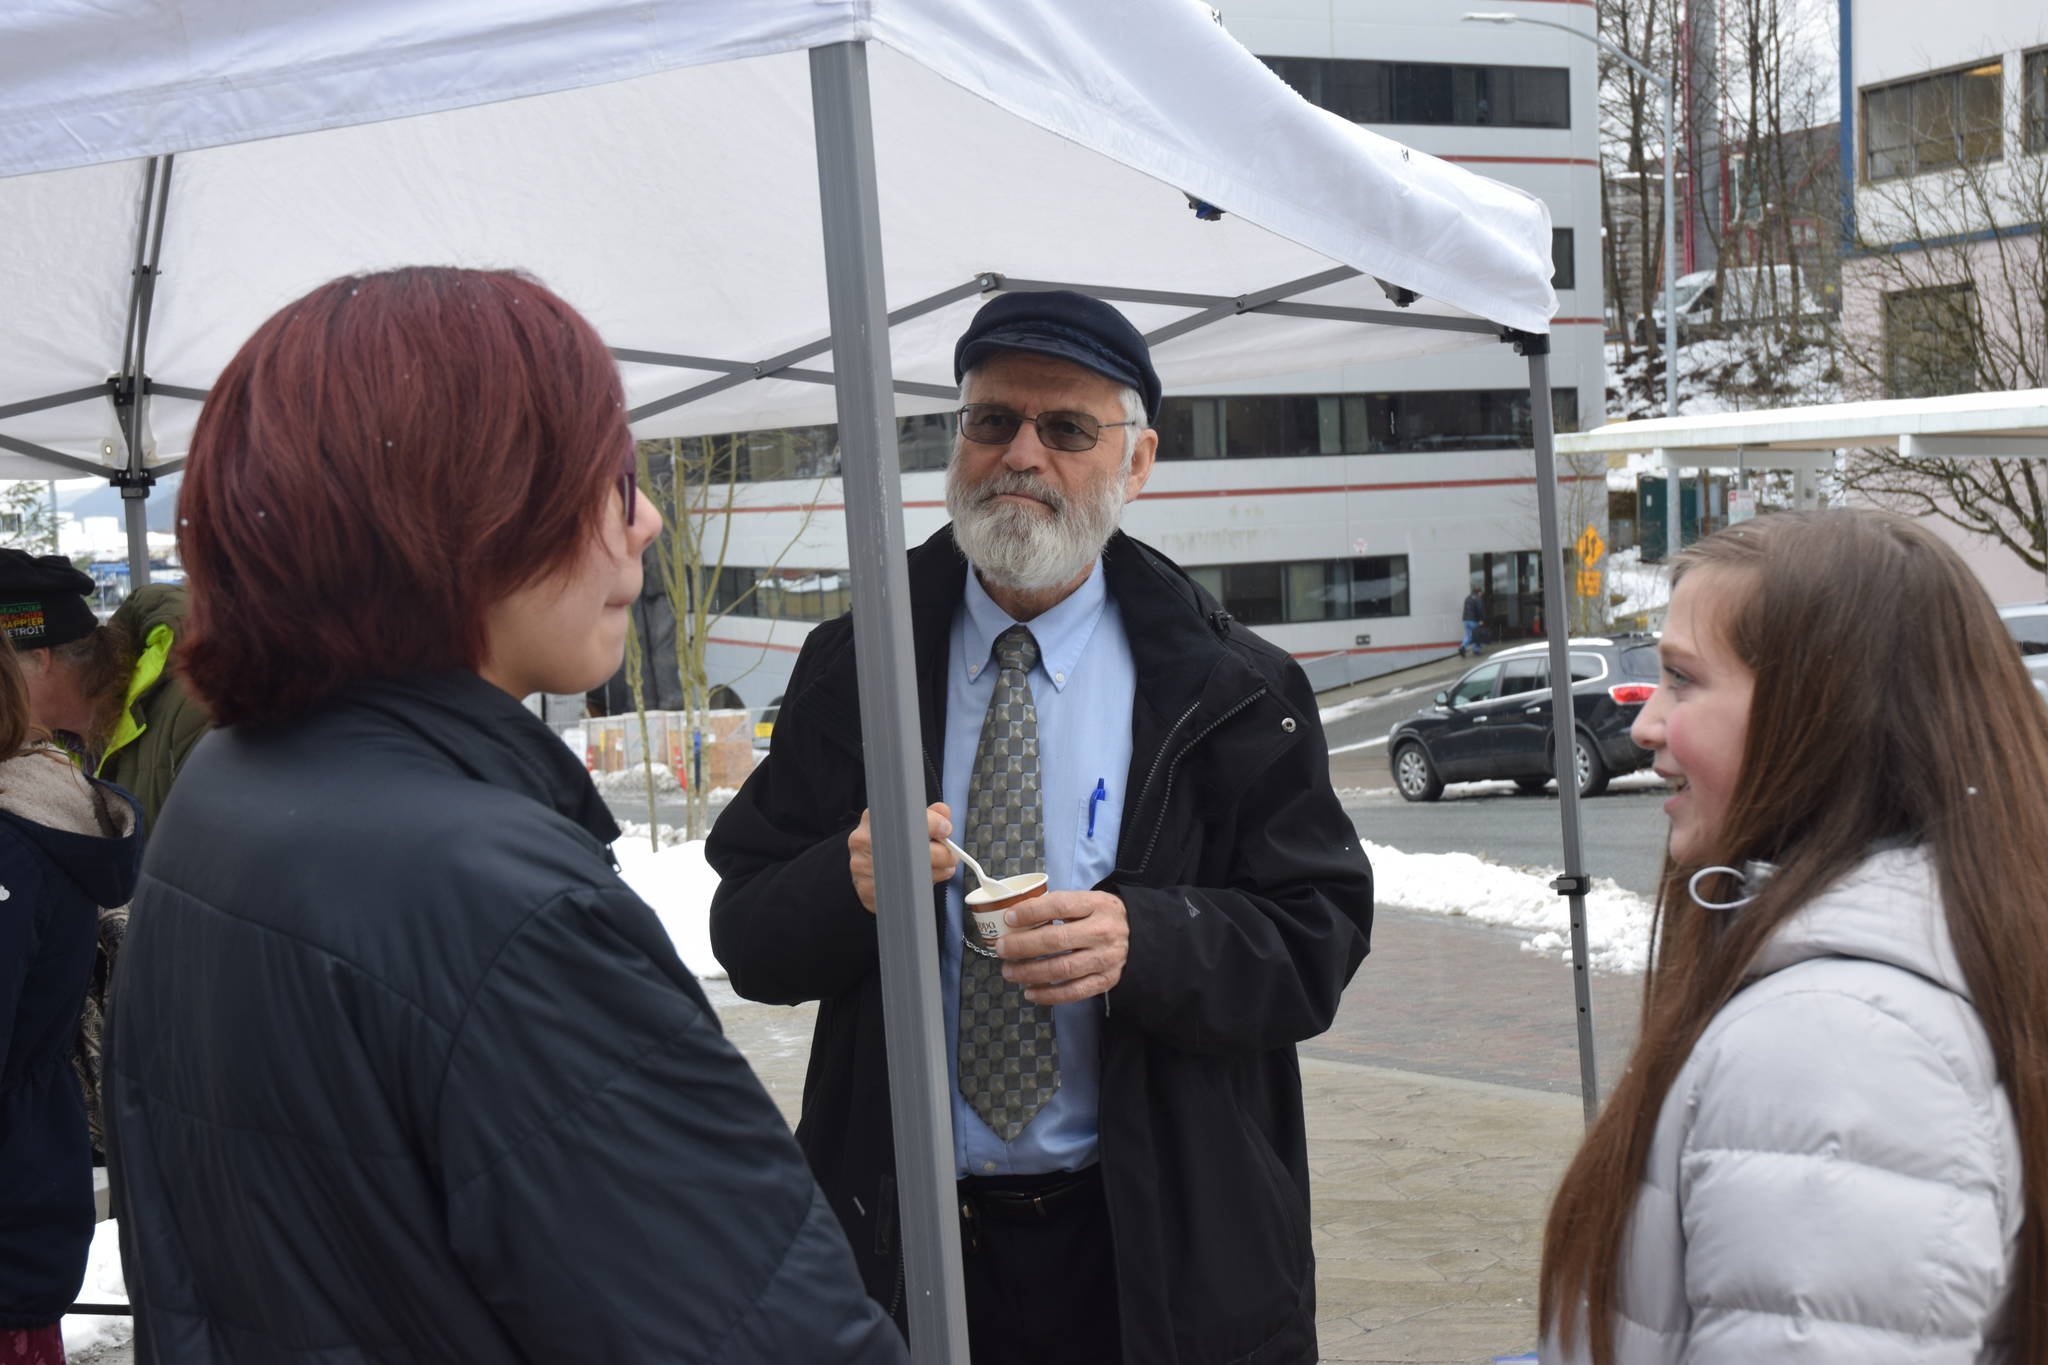 High school students and participants in Alaska Youth for Environmental Action, Kiara Demientieff, left, and Krystyn Kelly, right, speak with Rep. Paul Seton, R-Homer, at an AYEA picnic in front of the Alaska State Capitol on Friday. (Kevin Gullufsen | Juneau Empire)